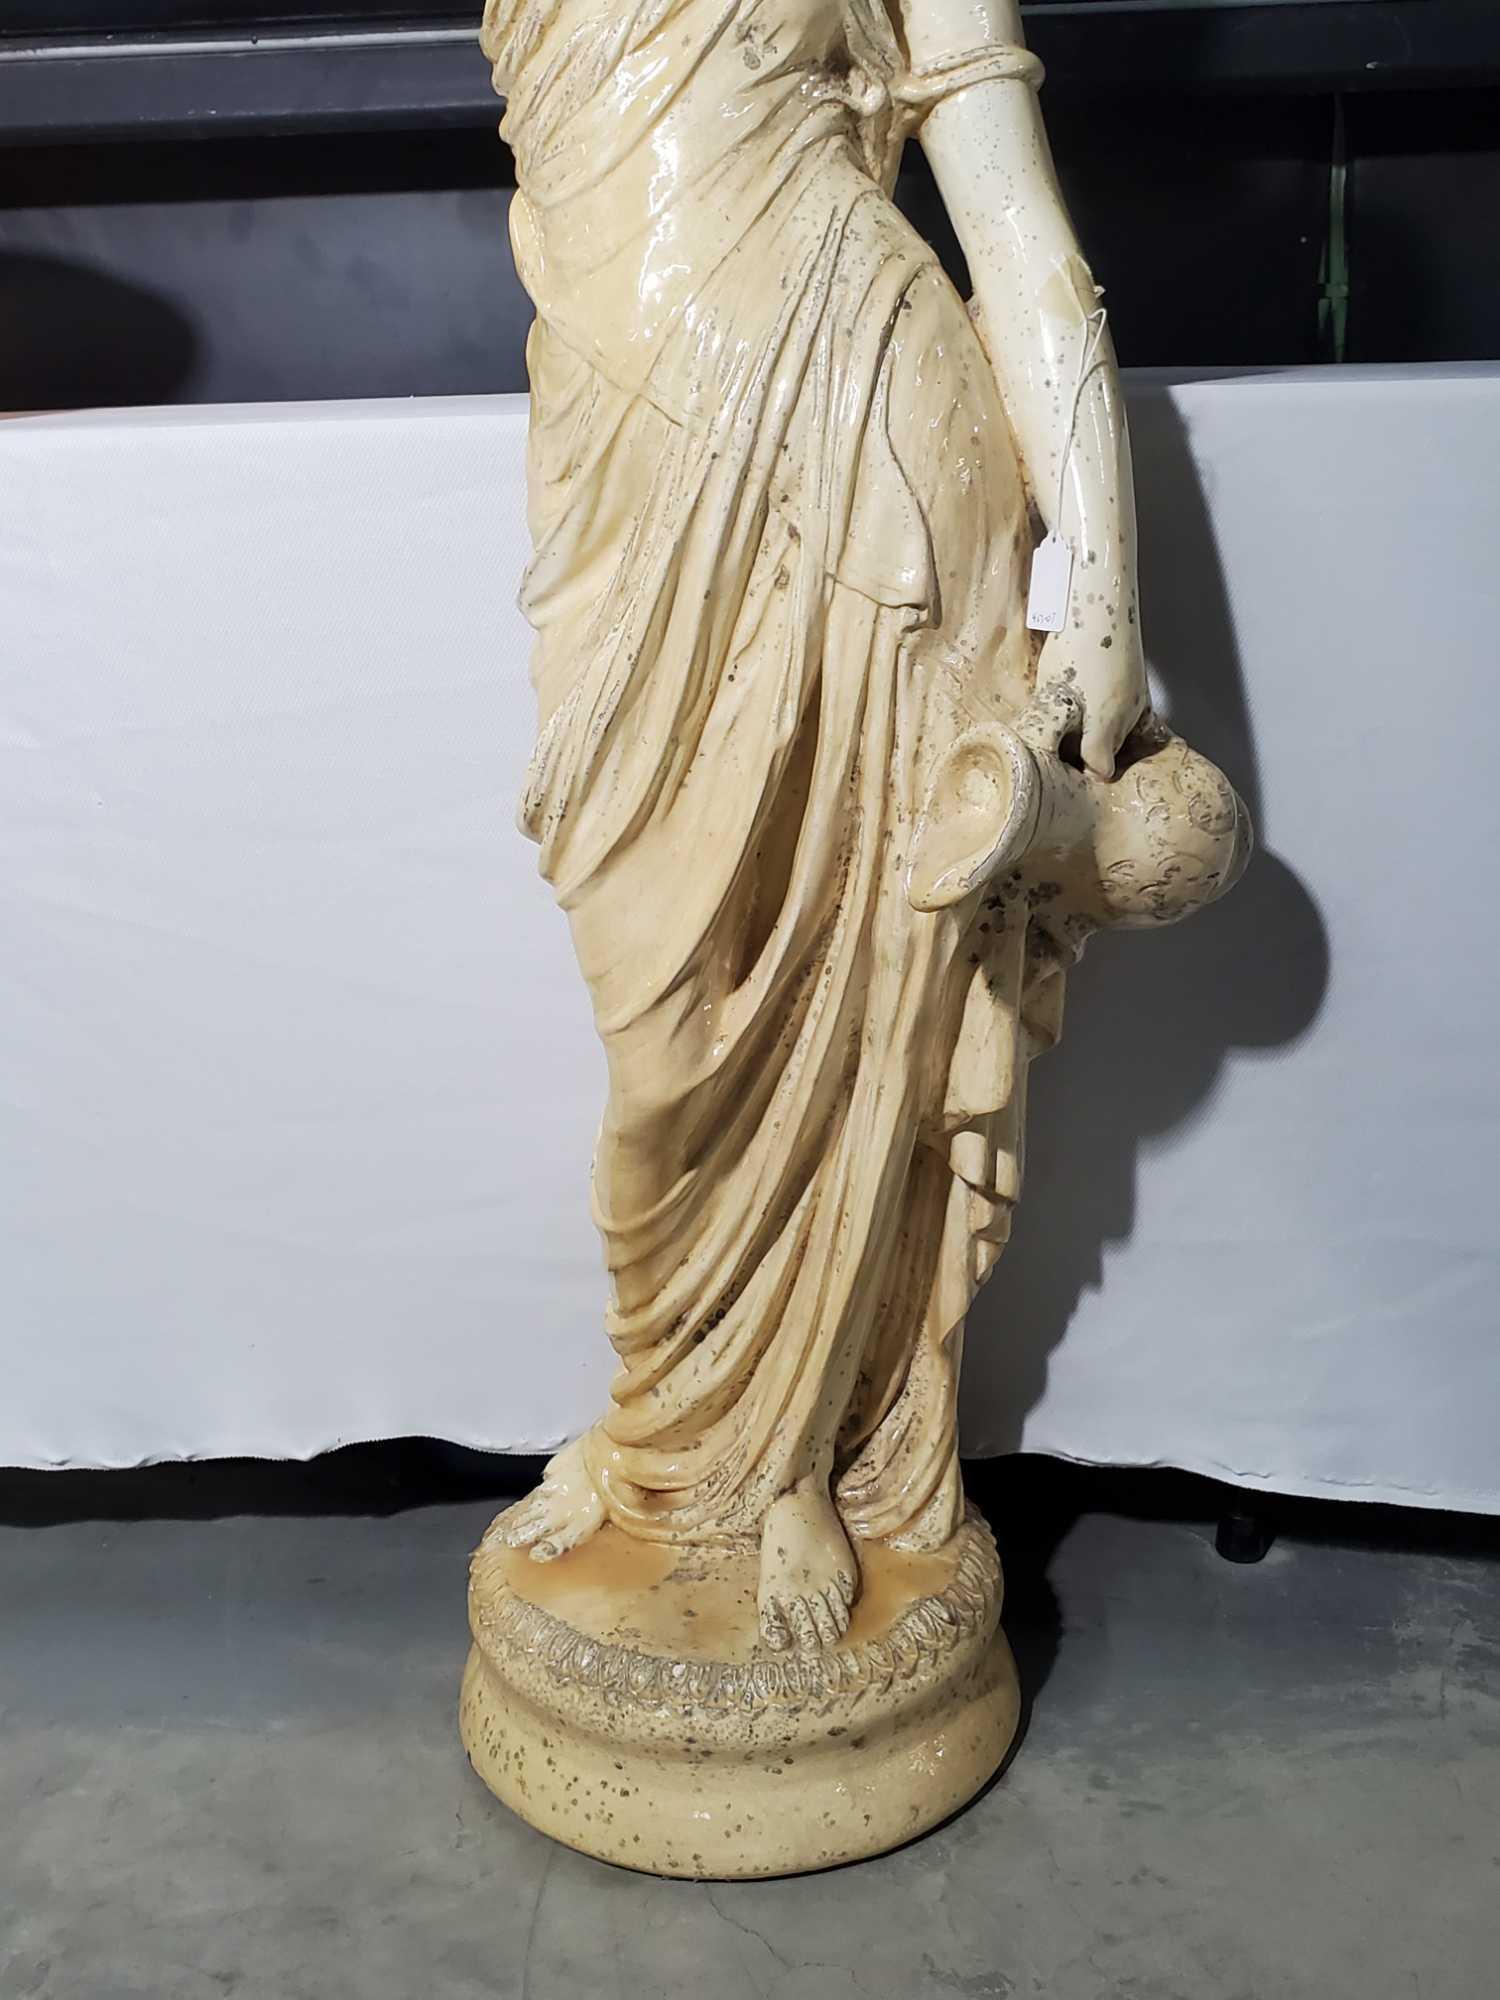 53" Statue of Woman with Urn and 20" Italian Terra Cotta Garden Urn